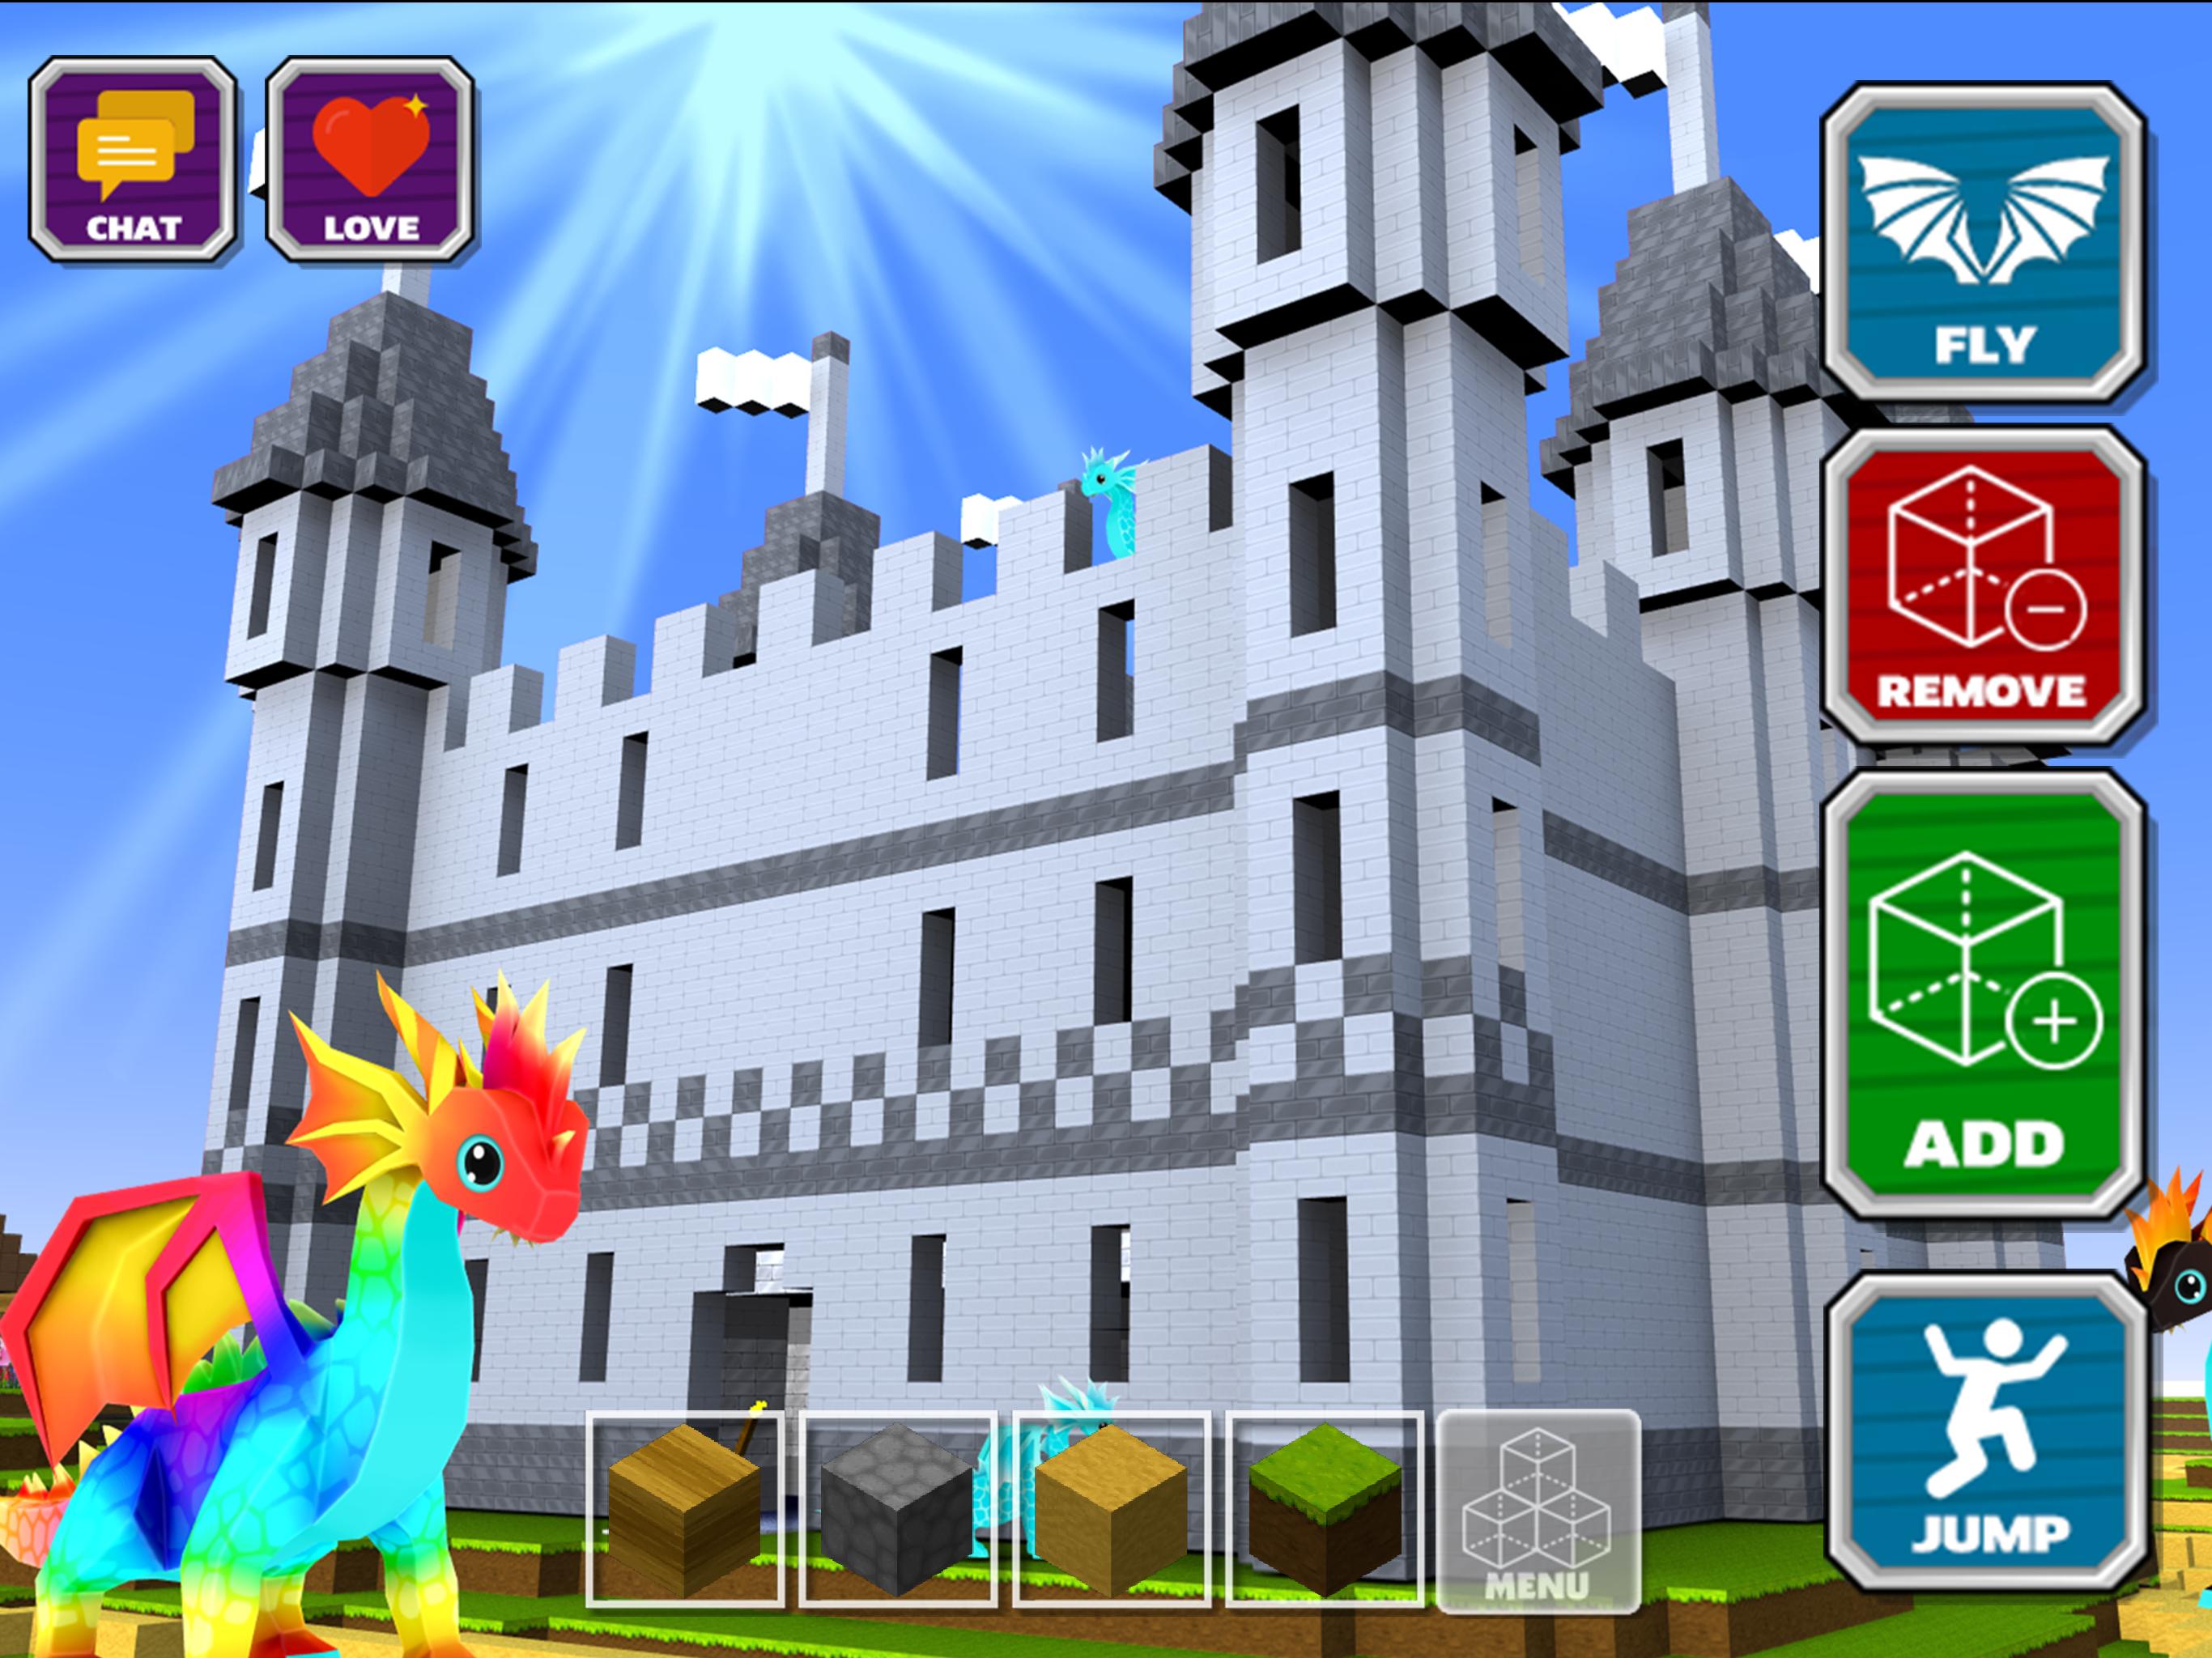 Dragon Craft for Android - APK Download - 